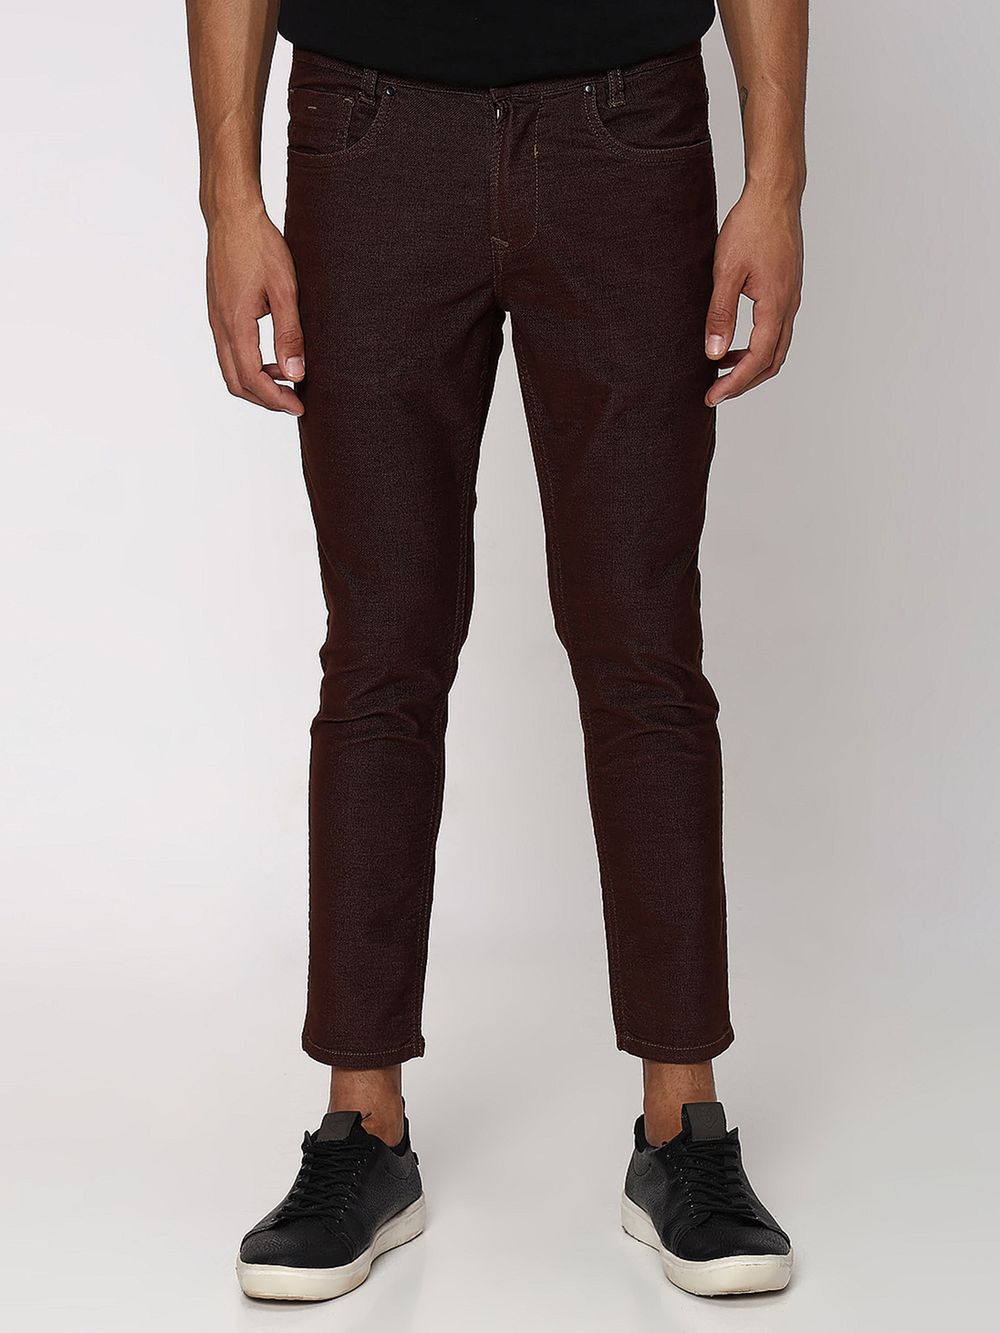 Brown Ankle Length Trouser